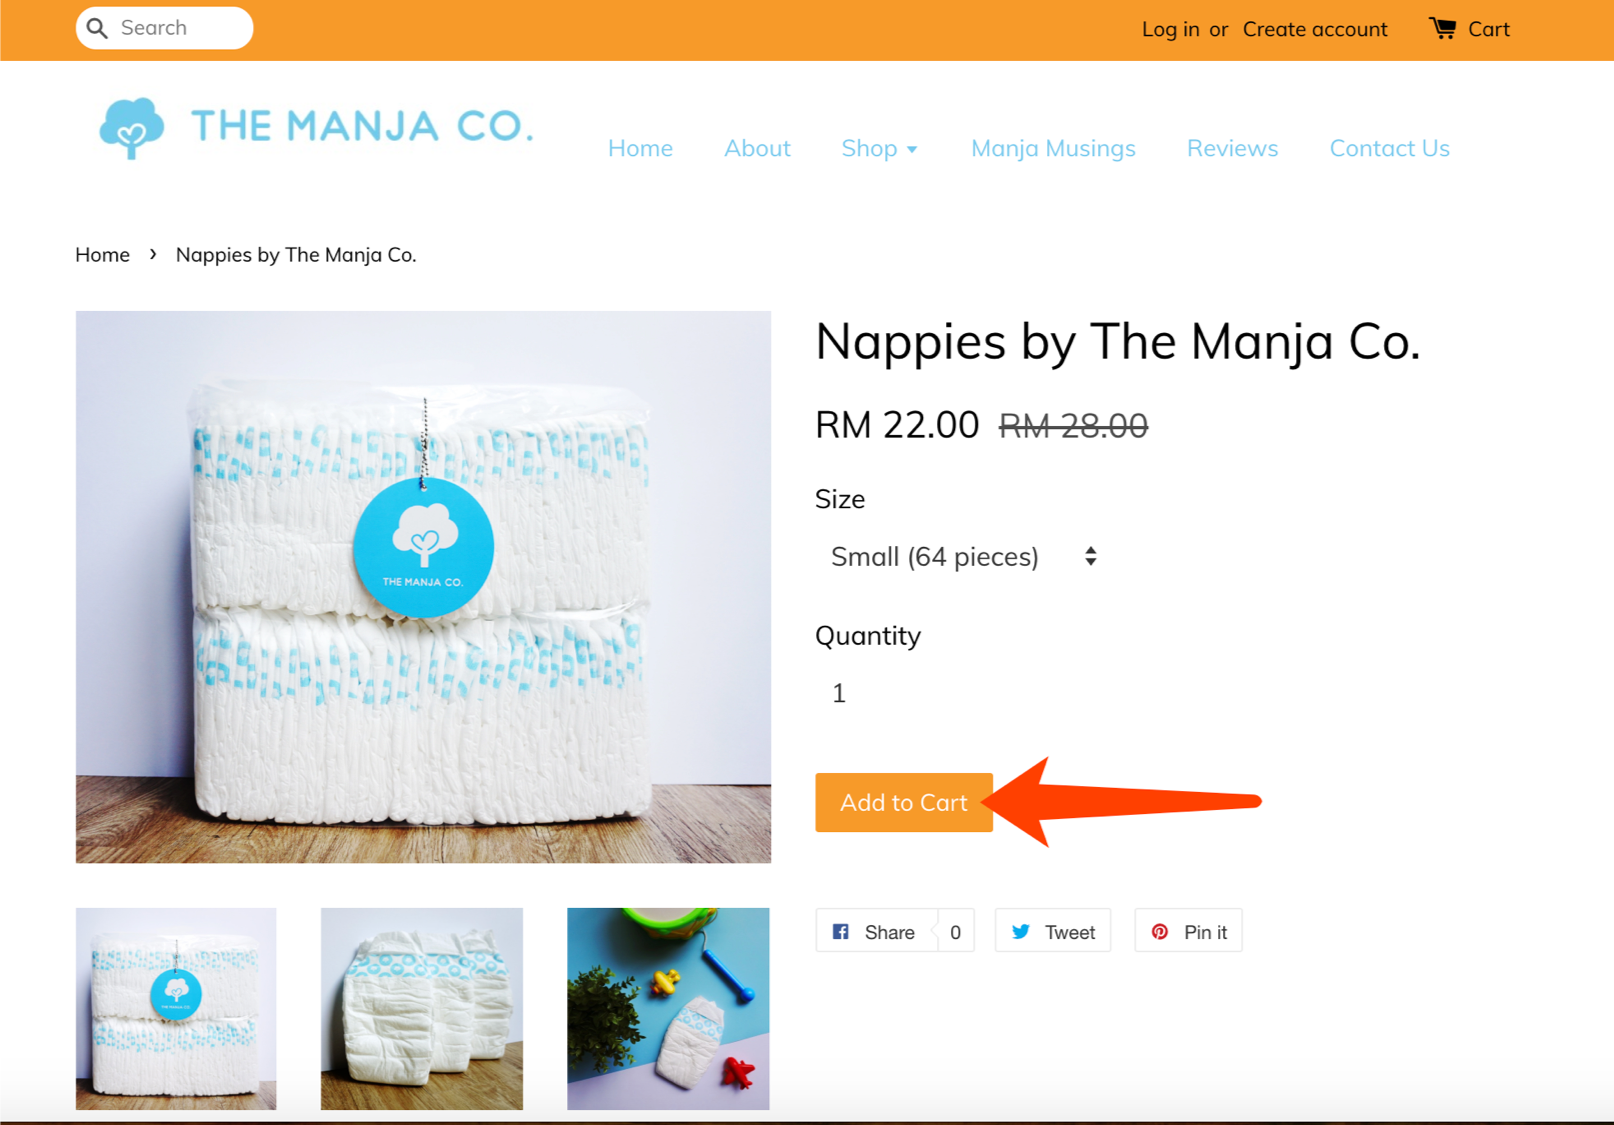 The Manja Company website’s pick up order guide. Step 2 in the ordering process. Screenshot shows how to go to the Shop page and add your desired item to Cart. "Nappies by The Manja Company" is the hot new baby diapers brand in Malaysia.